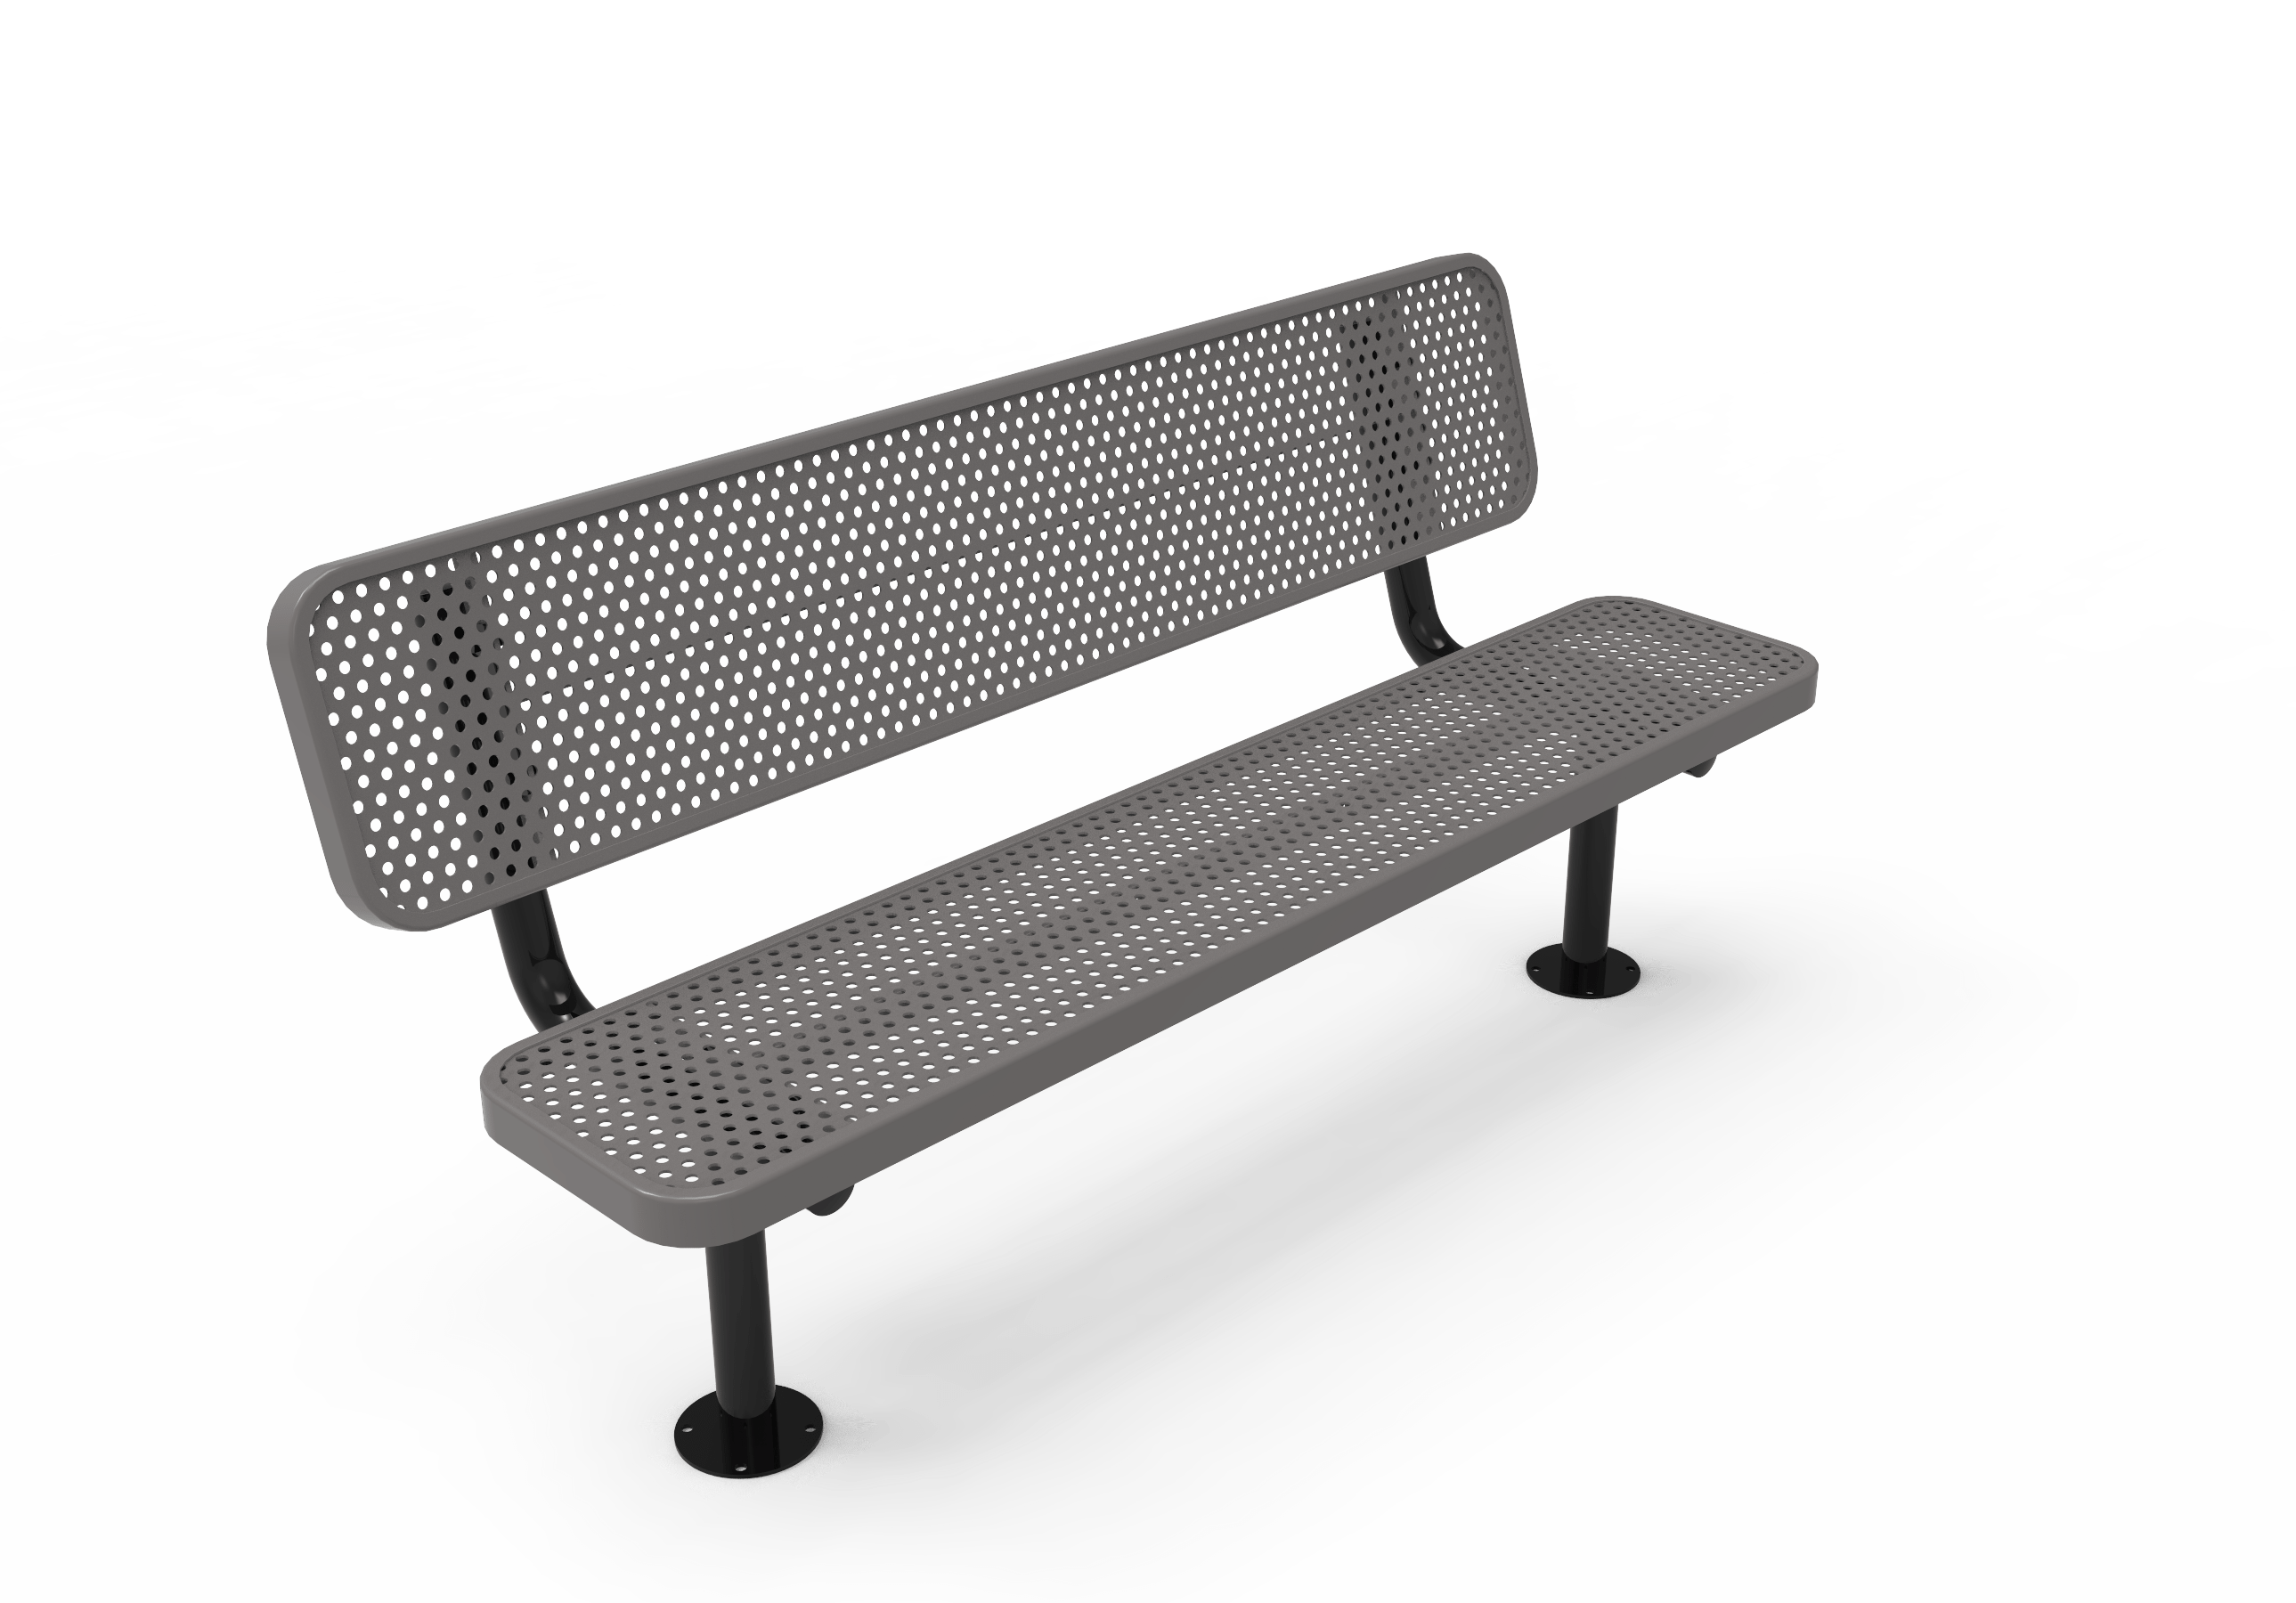 6′ Players Bench With Back-Punched
BPY06-D-32-000
Industry Standard Finish
$879.00
BPY06-B-32-000
Advantage Premium Finish
$1099.00
